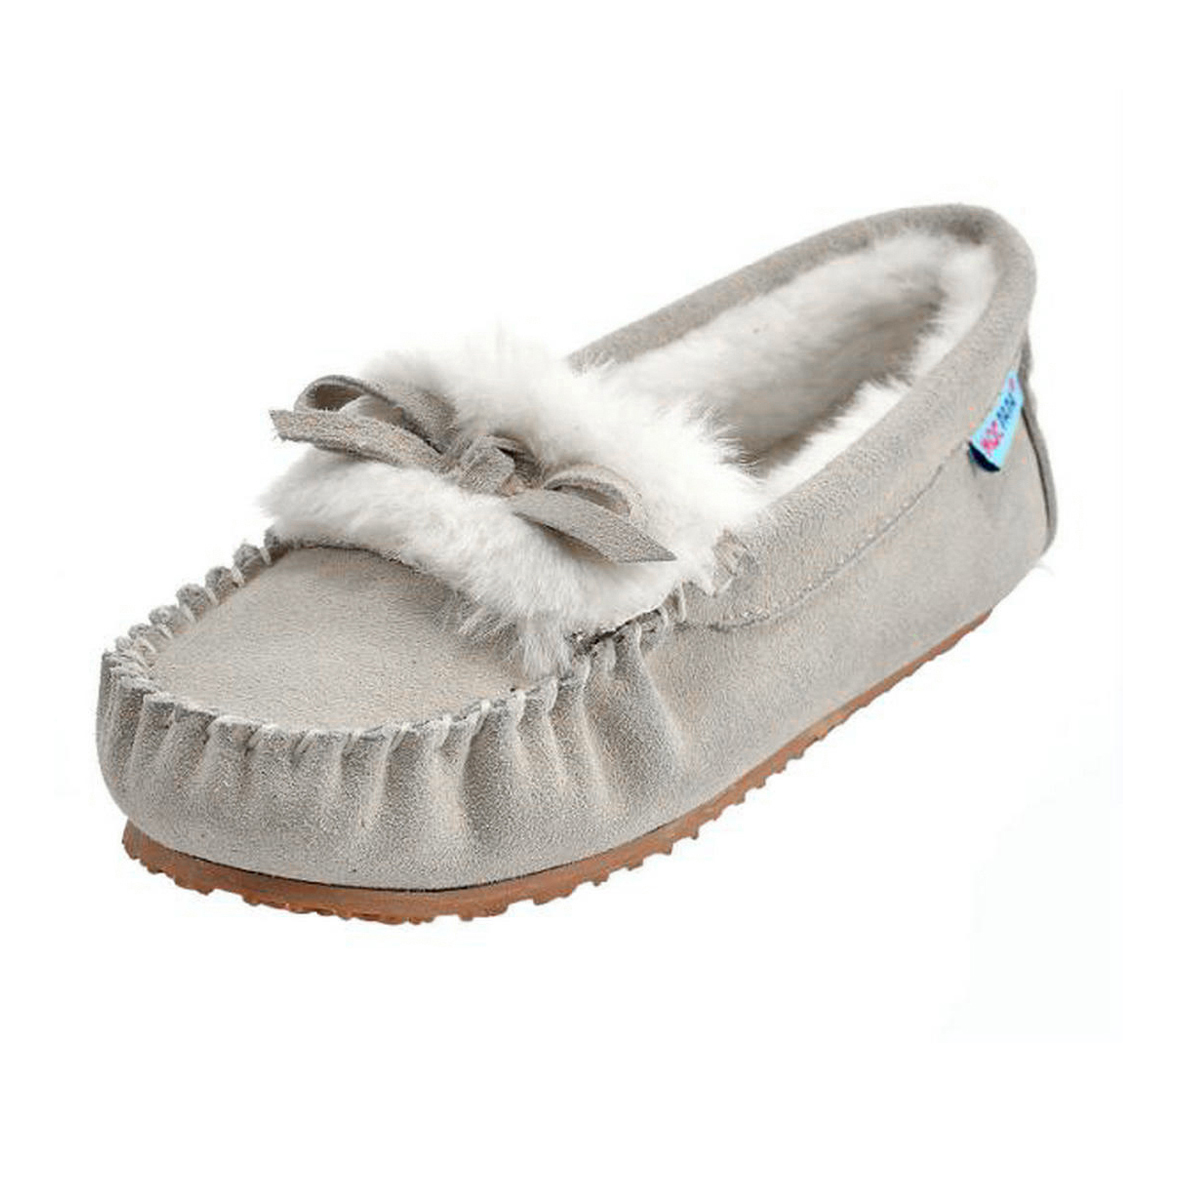 Stay Comfortable and Stylish with these Casual Slippers